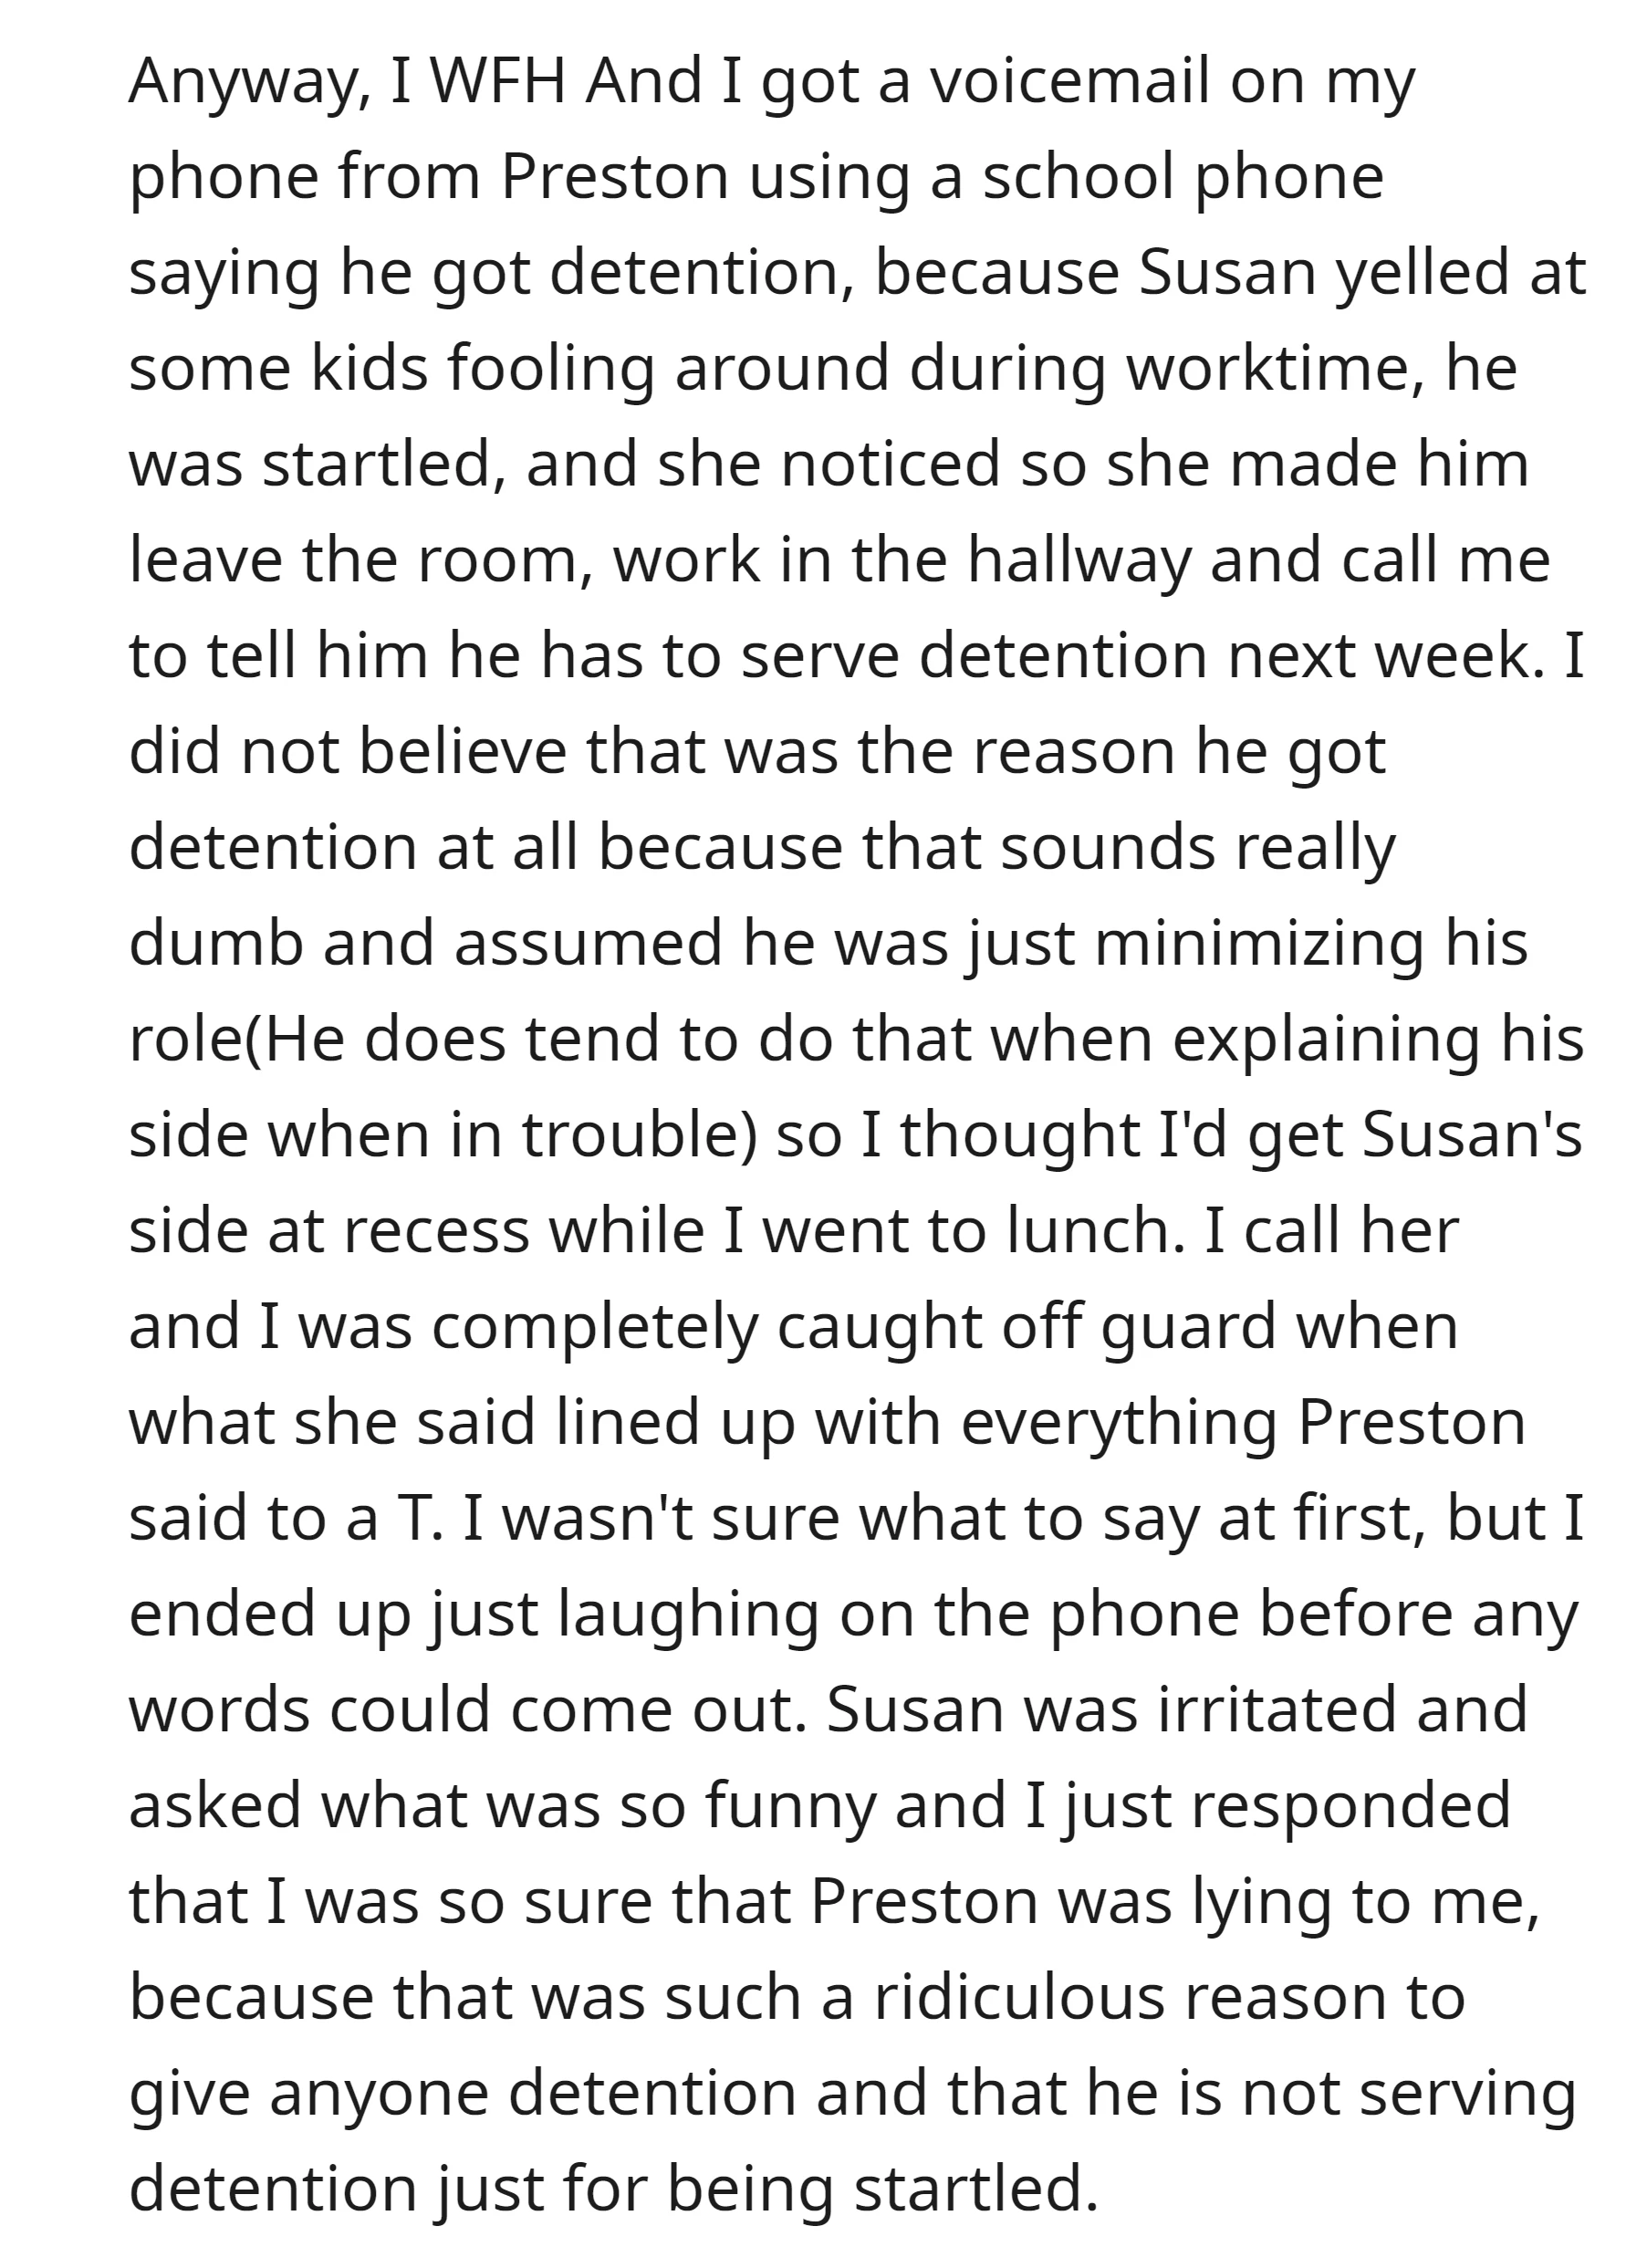 OP initially doubted her son's claim of getting detention for being startled by Susan's loud voice